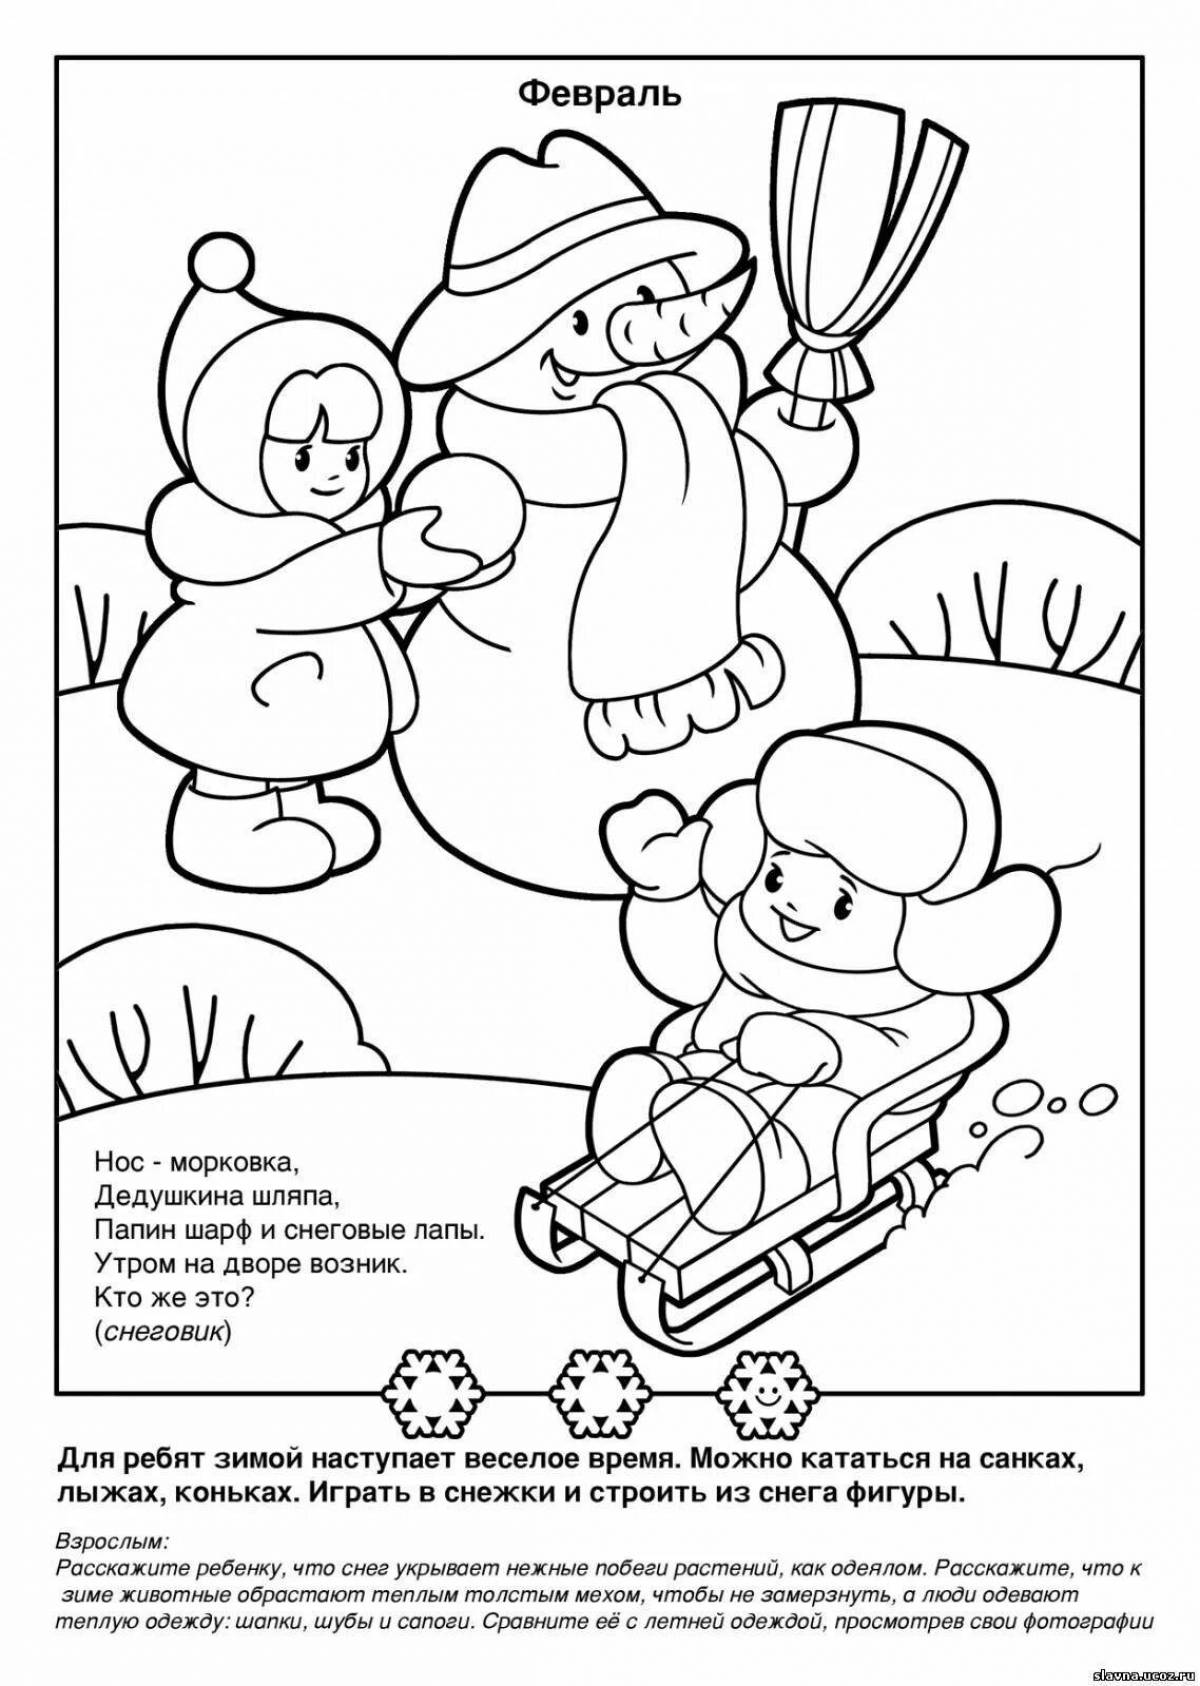 Adorable December coloring book for kids